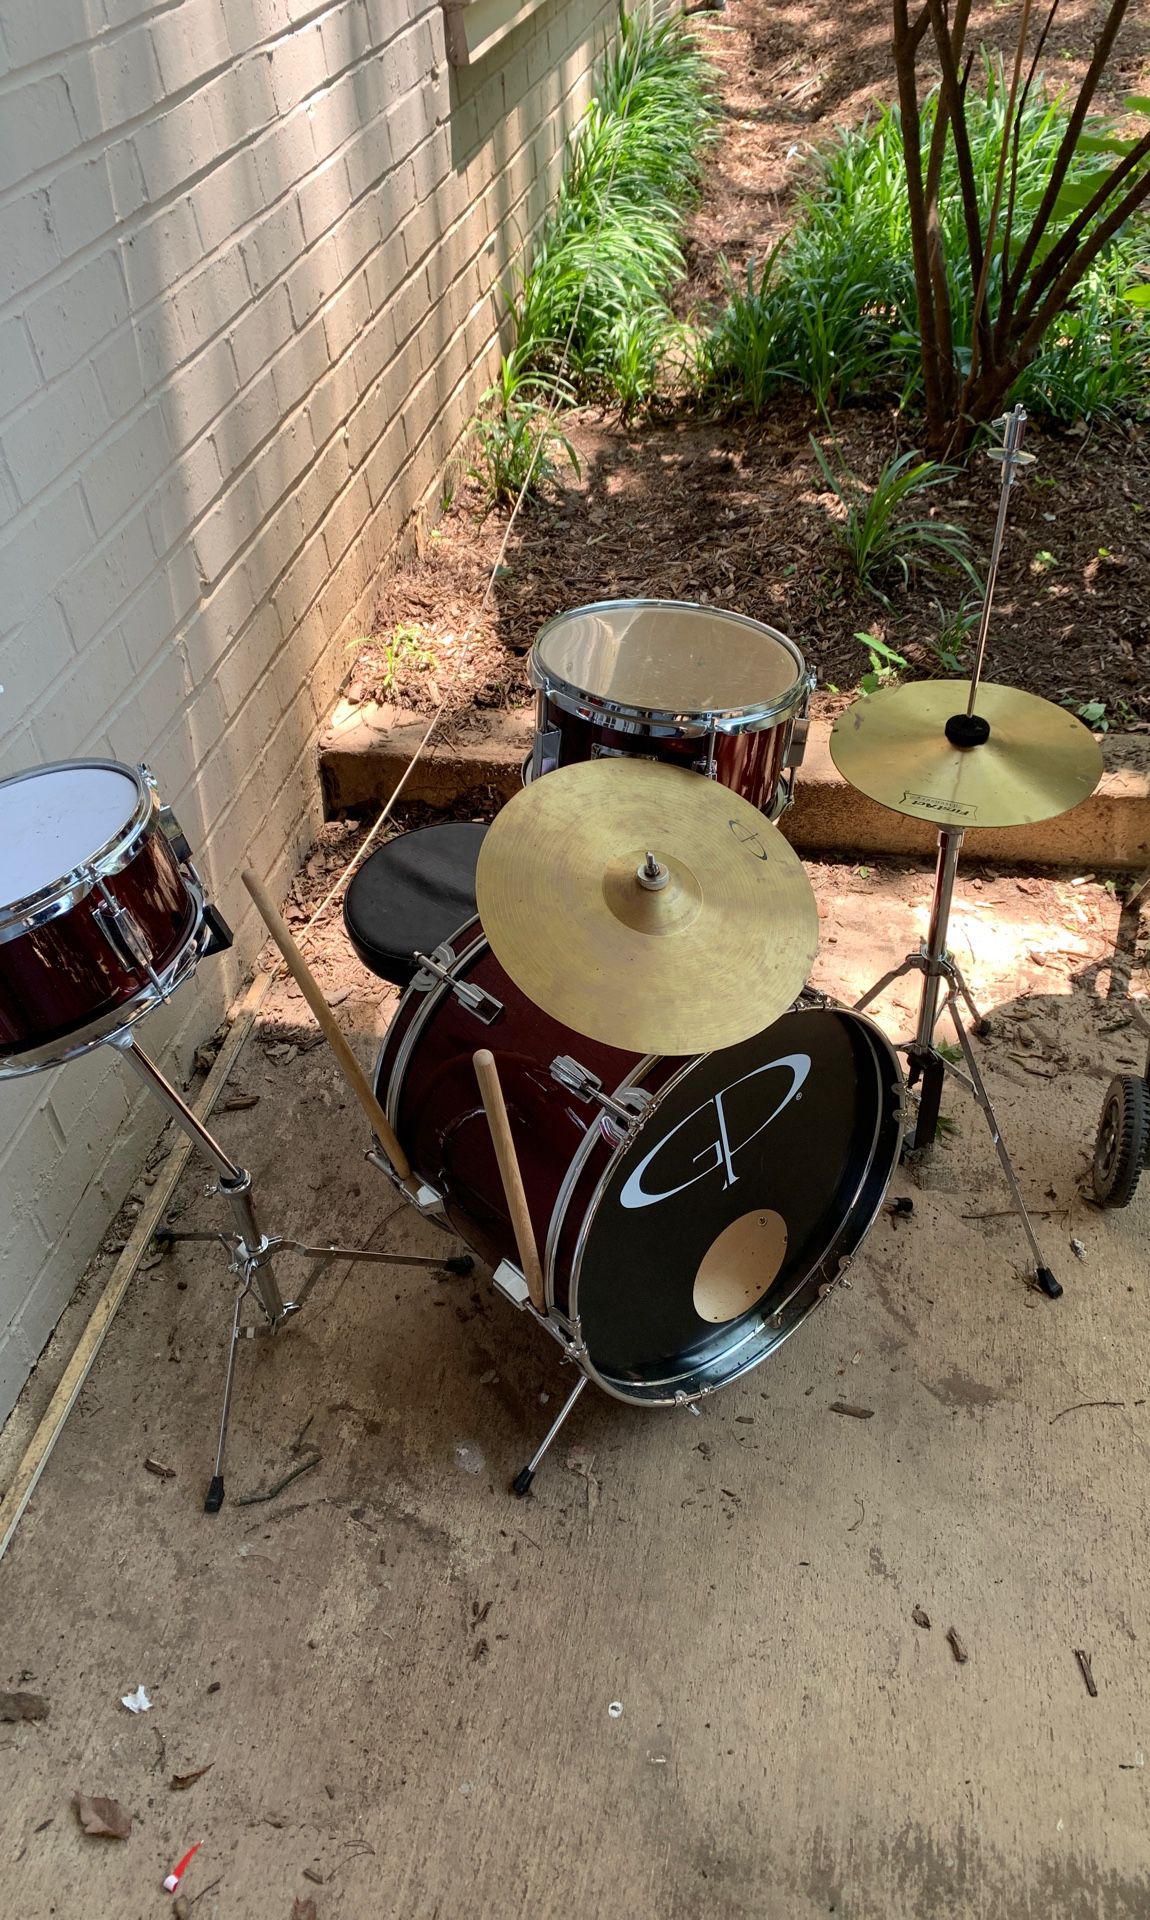 Kids size gp Drum set in good condition just needs cleaning Serious buyers only